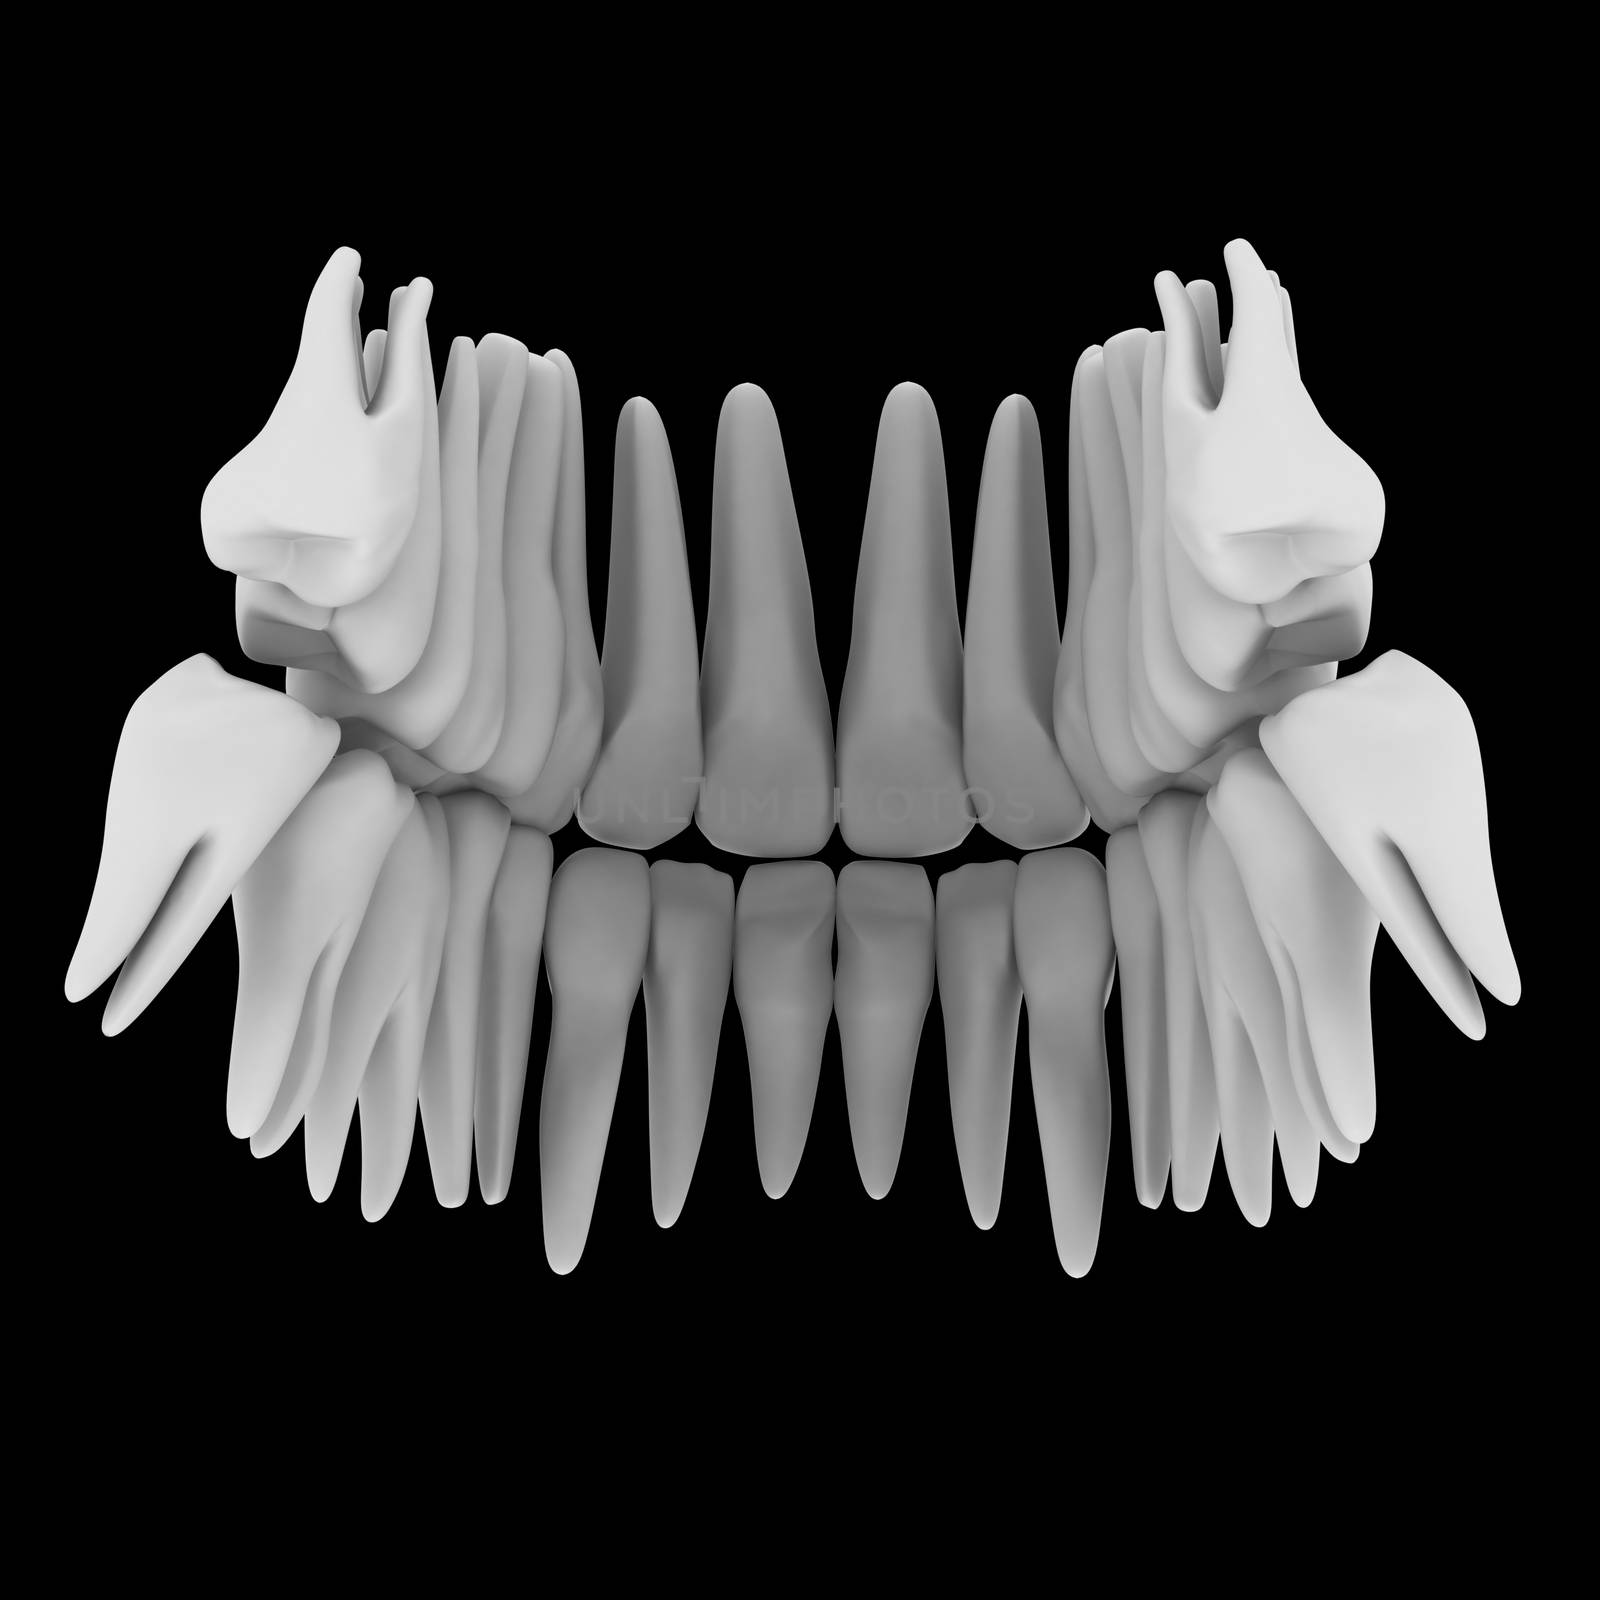 3d image of white teeth isolated on black - back view